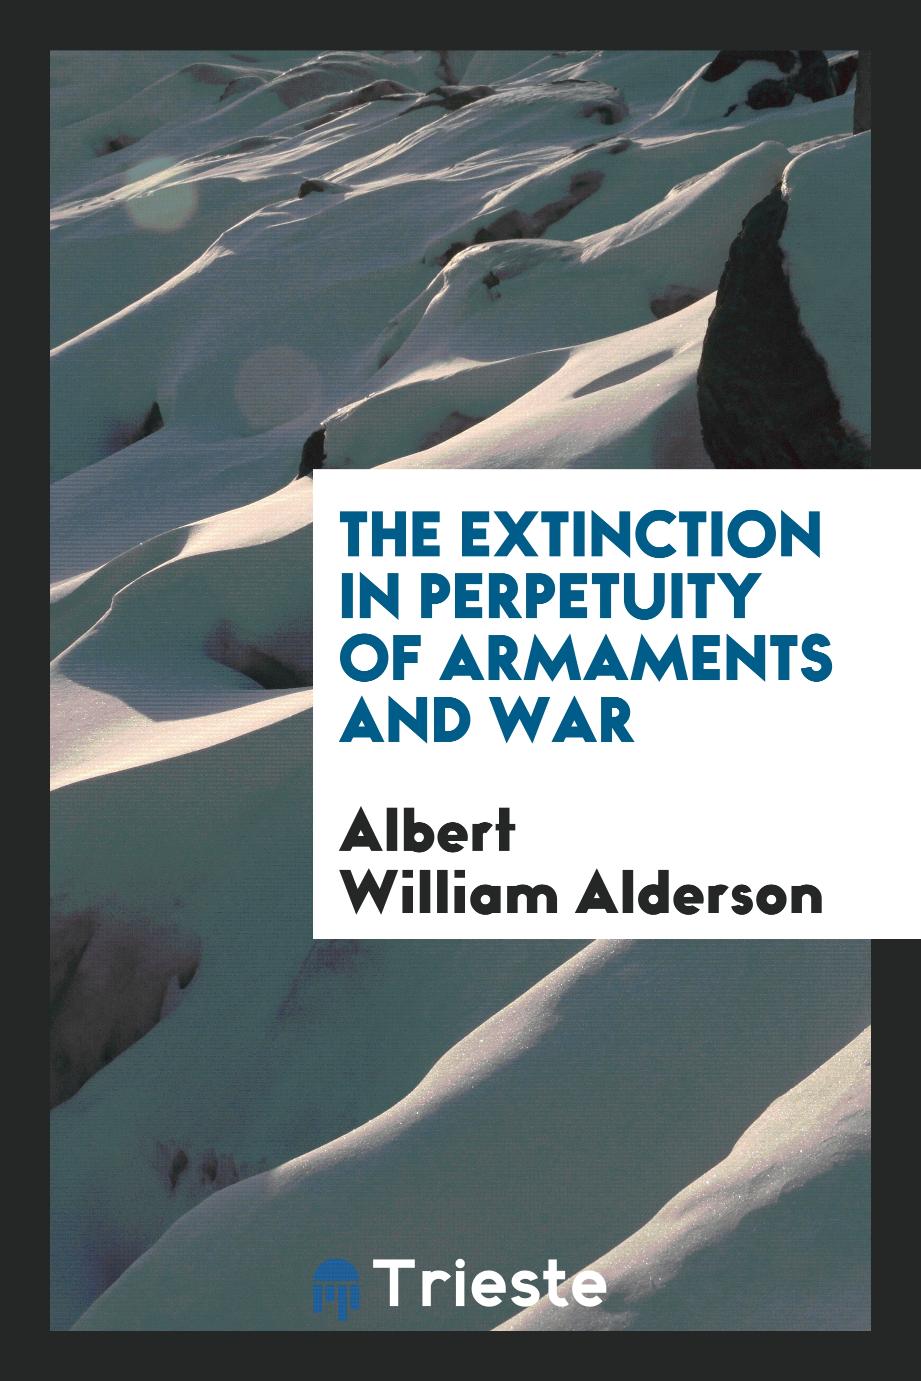 The extinction in perpetuity of armaments and war